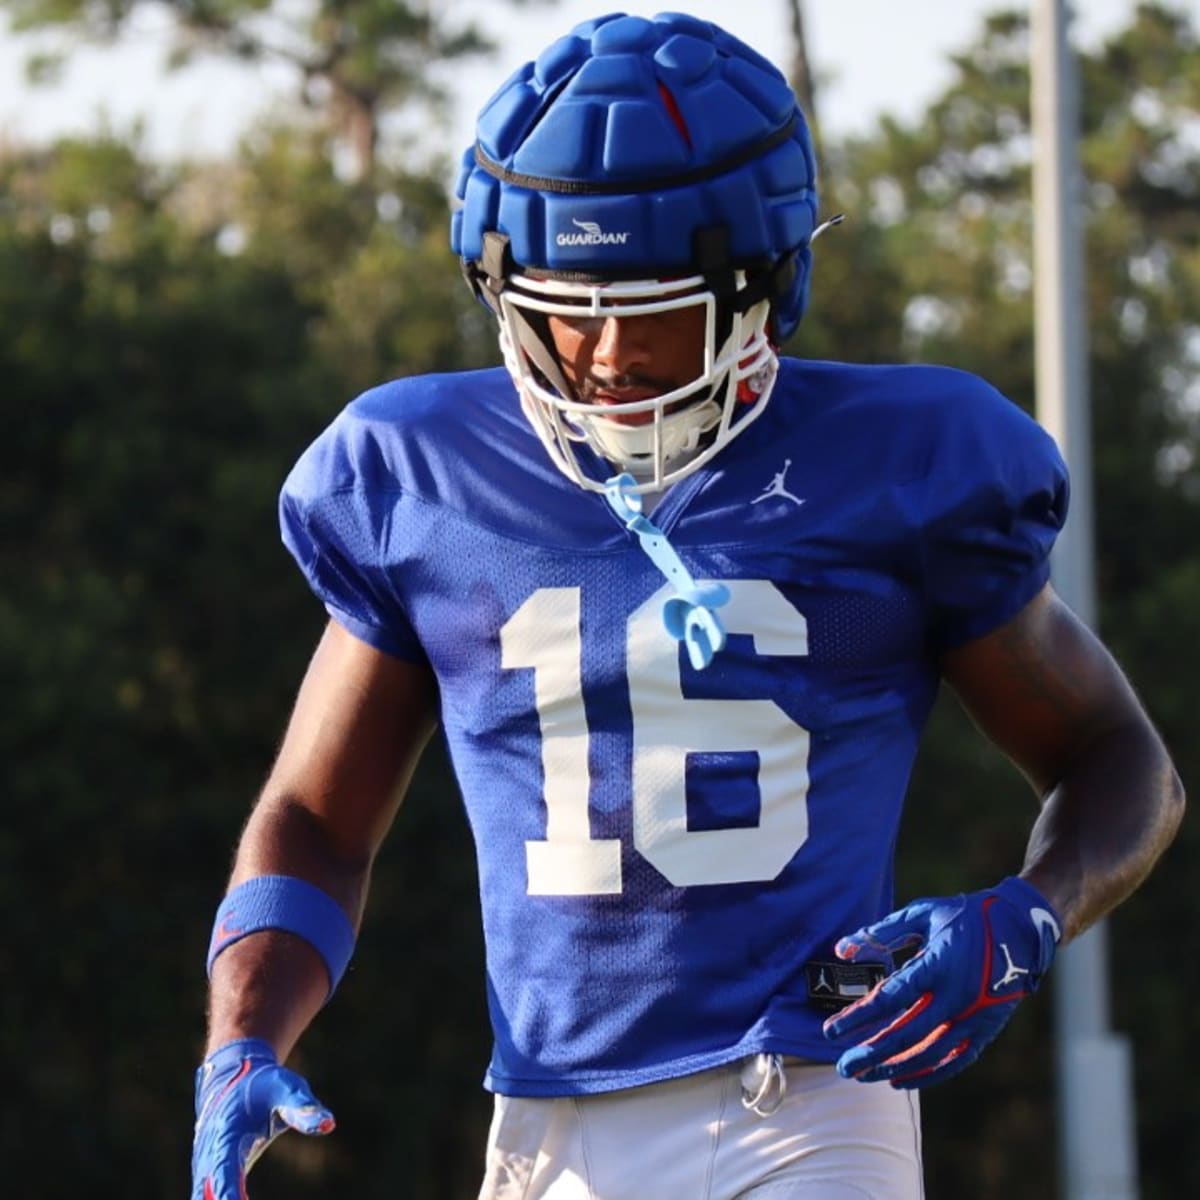 Added athleticism, depth brings new opportunities for Florida